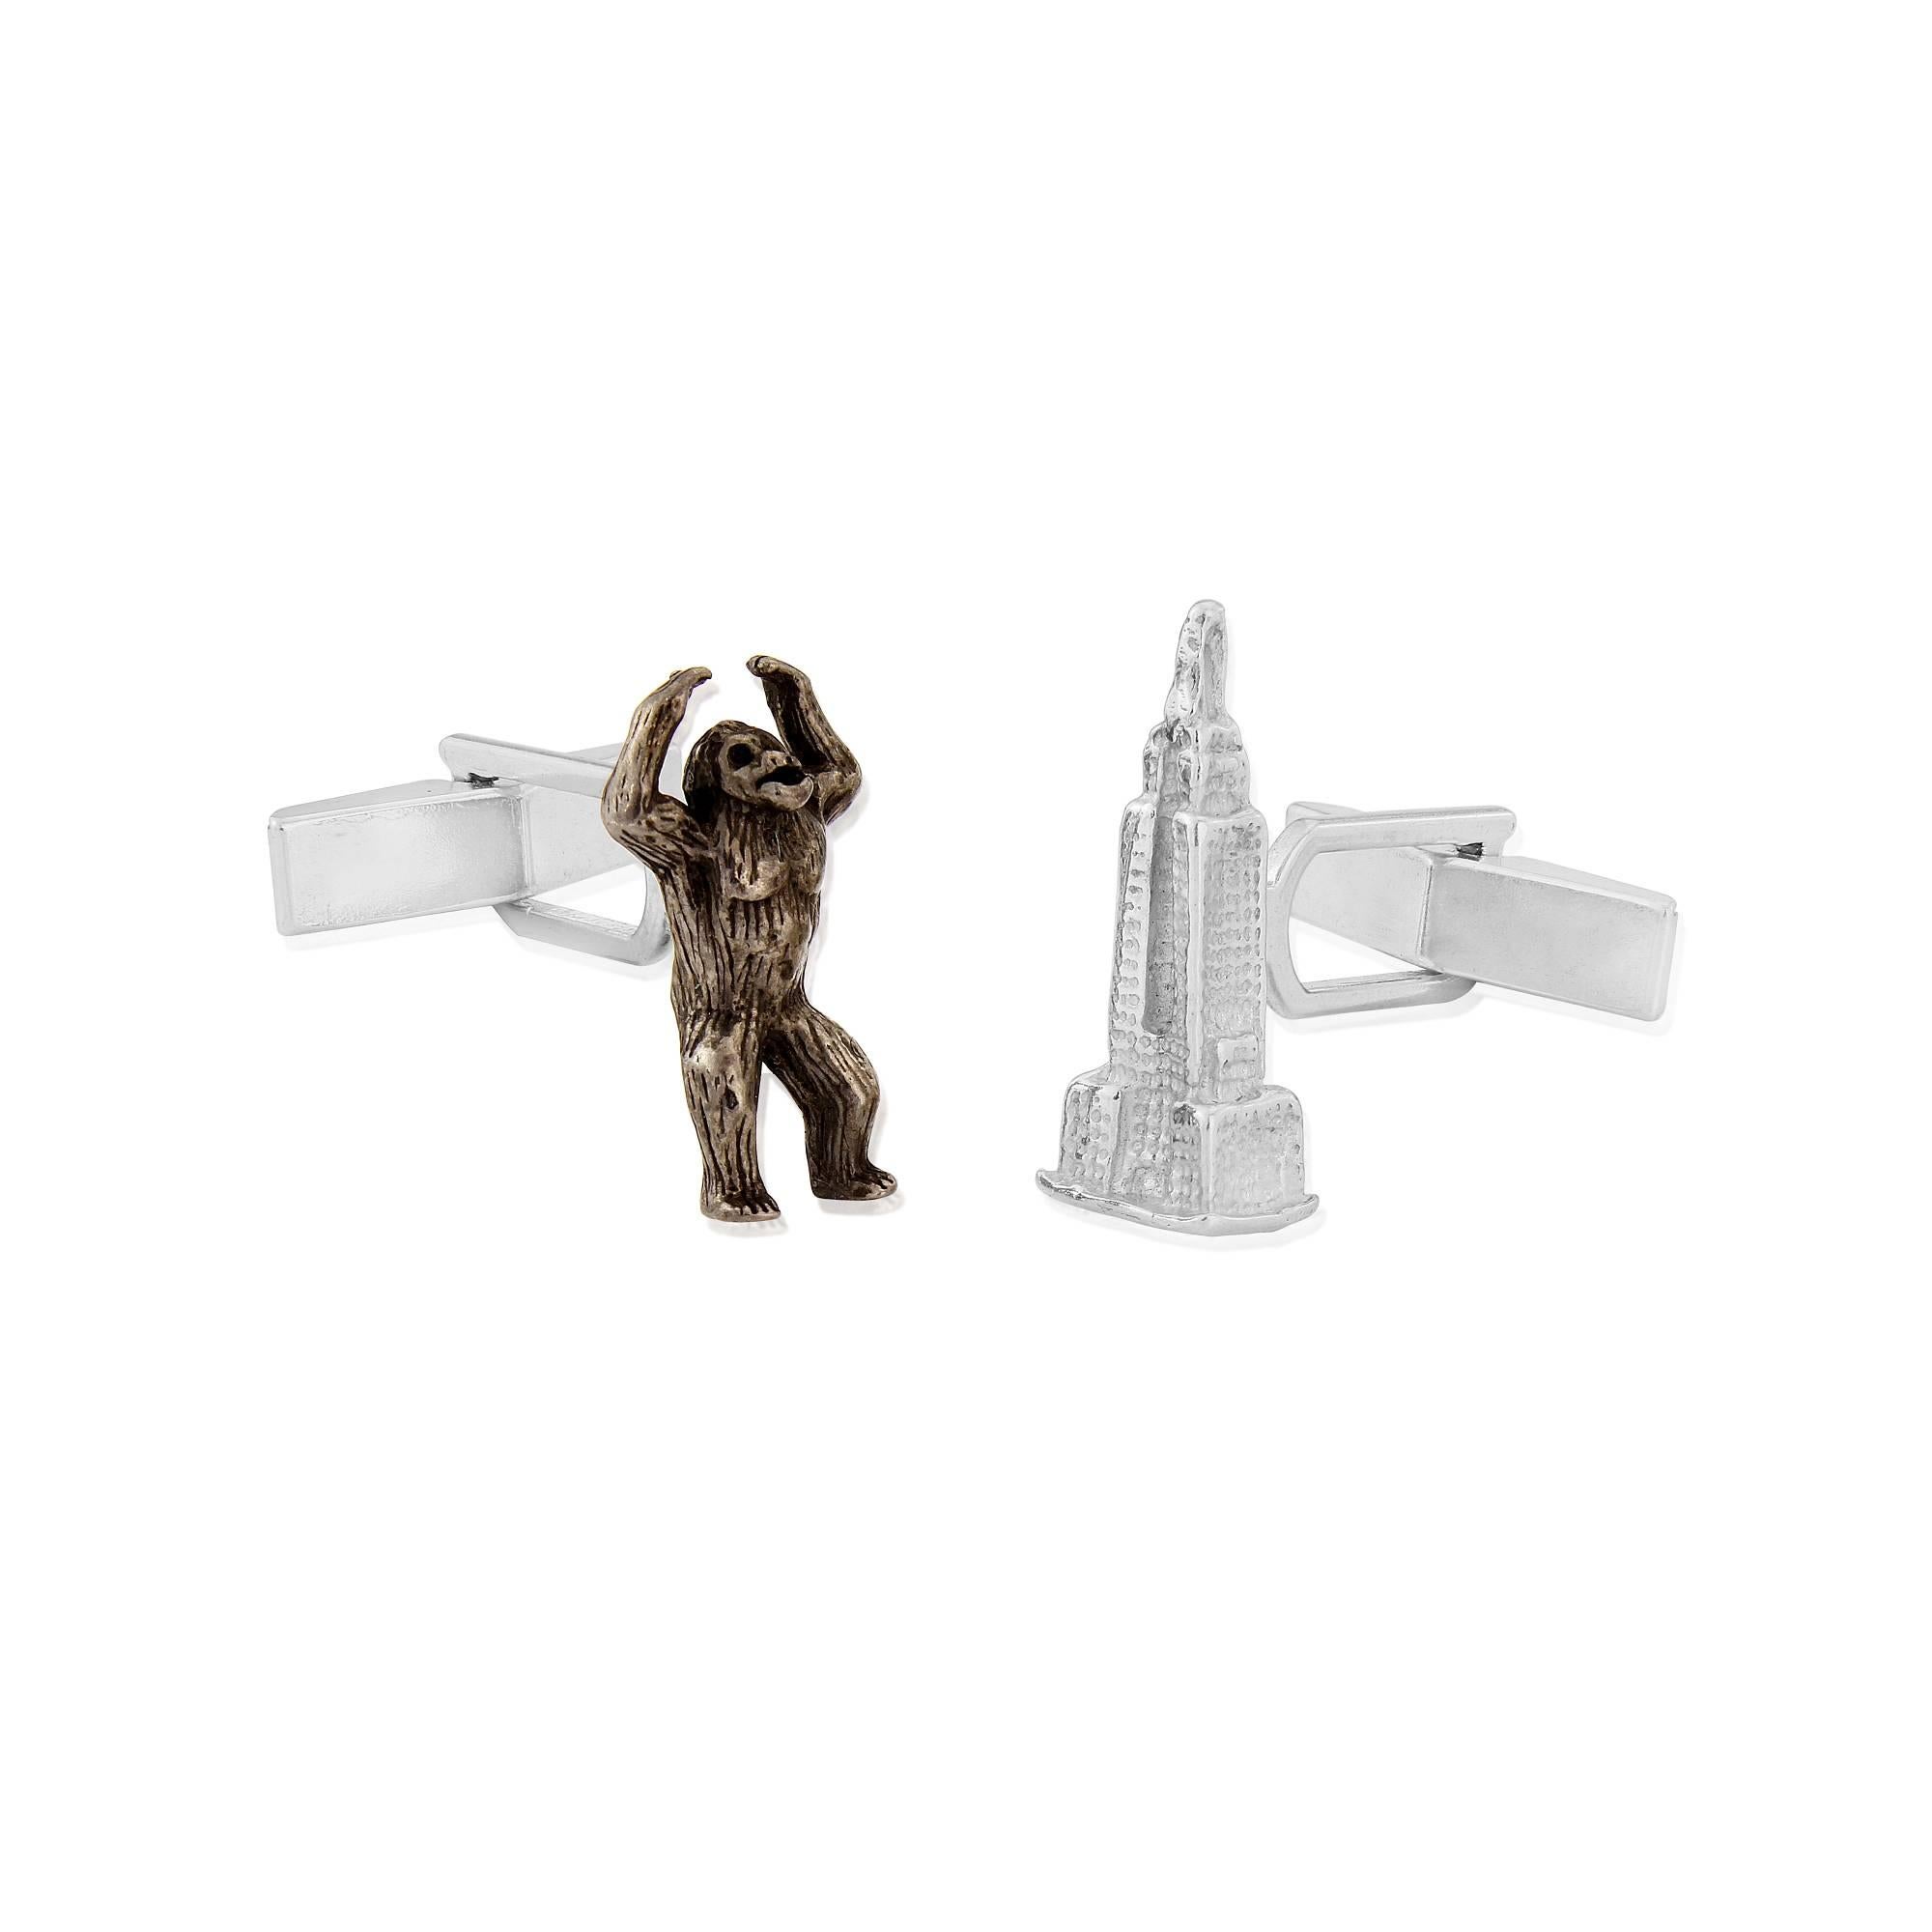 This striking pair of cufflinks was designed by Simon Kemp...exclusive to Simon Kemp Jewellers.
Simon has used black Rhodium on the sterling silver King Kong which makes a stunning contrast with the silver Empire States Building.
Stand out from the